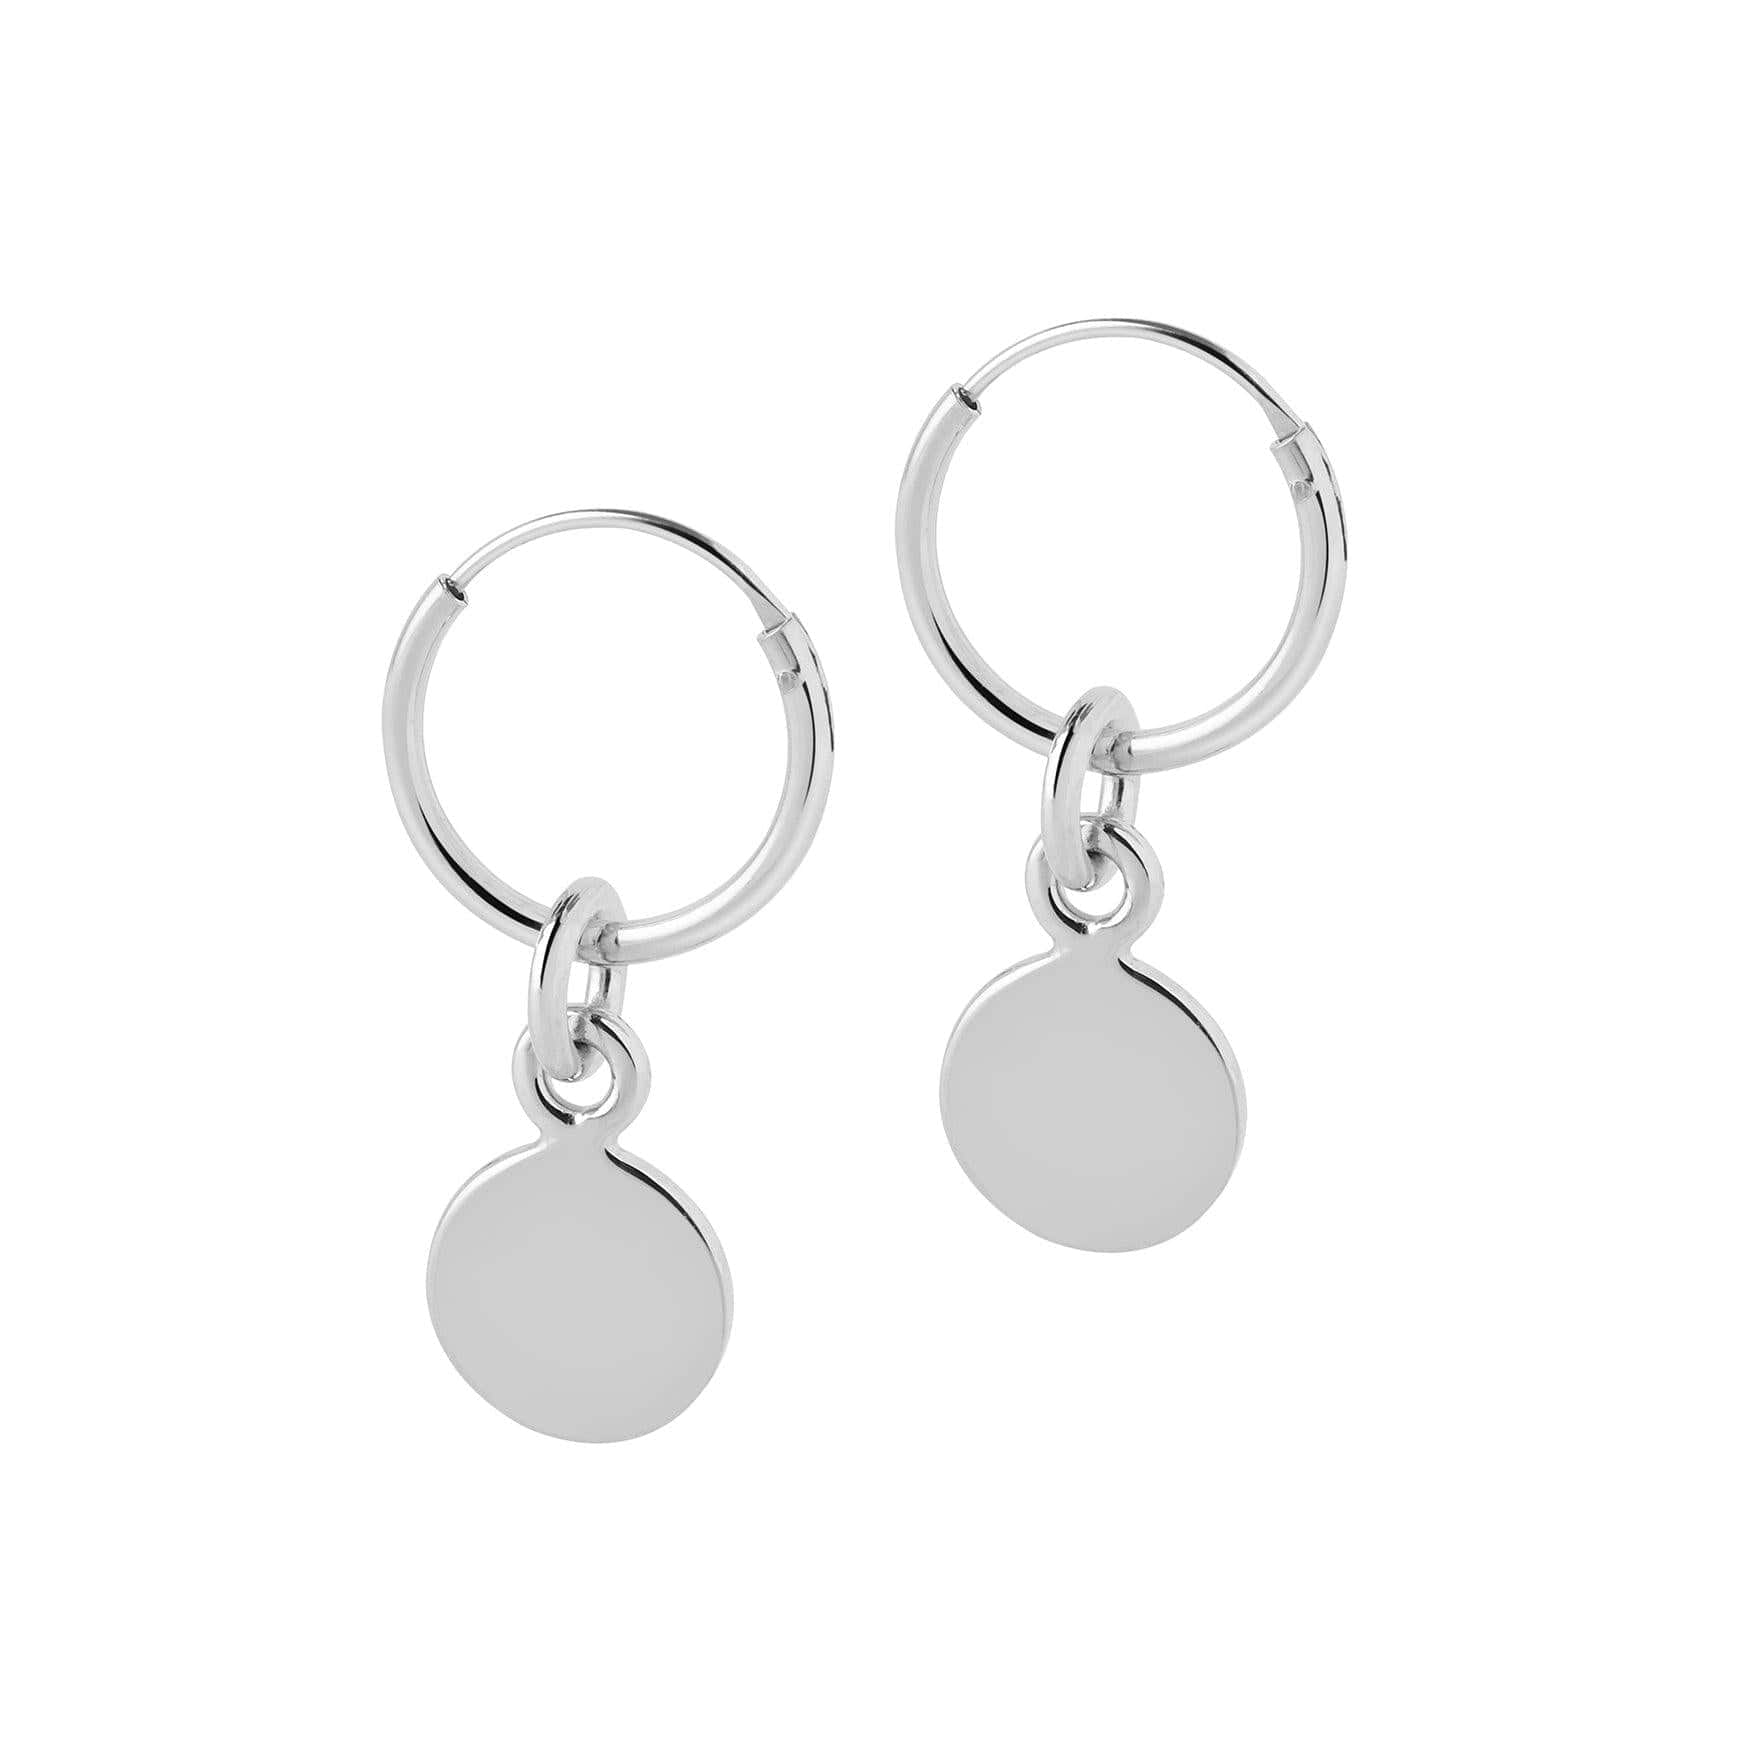 12 mm silver hoop earrings with round pendant